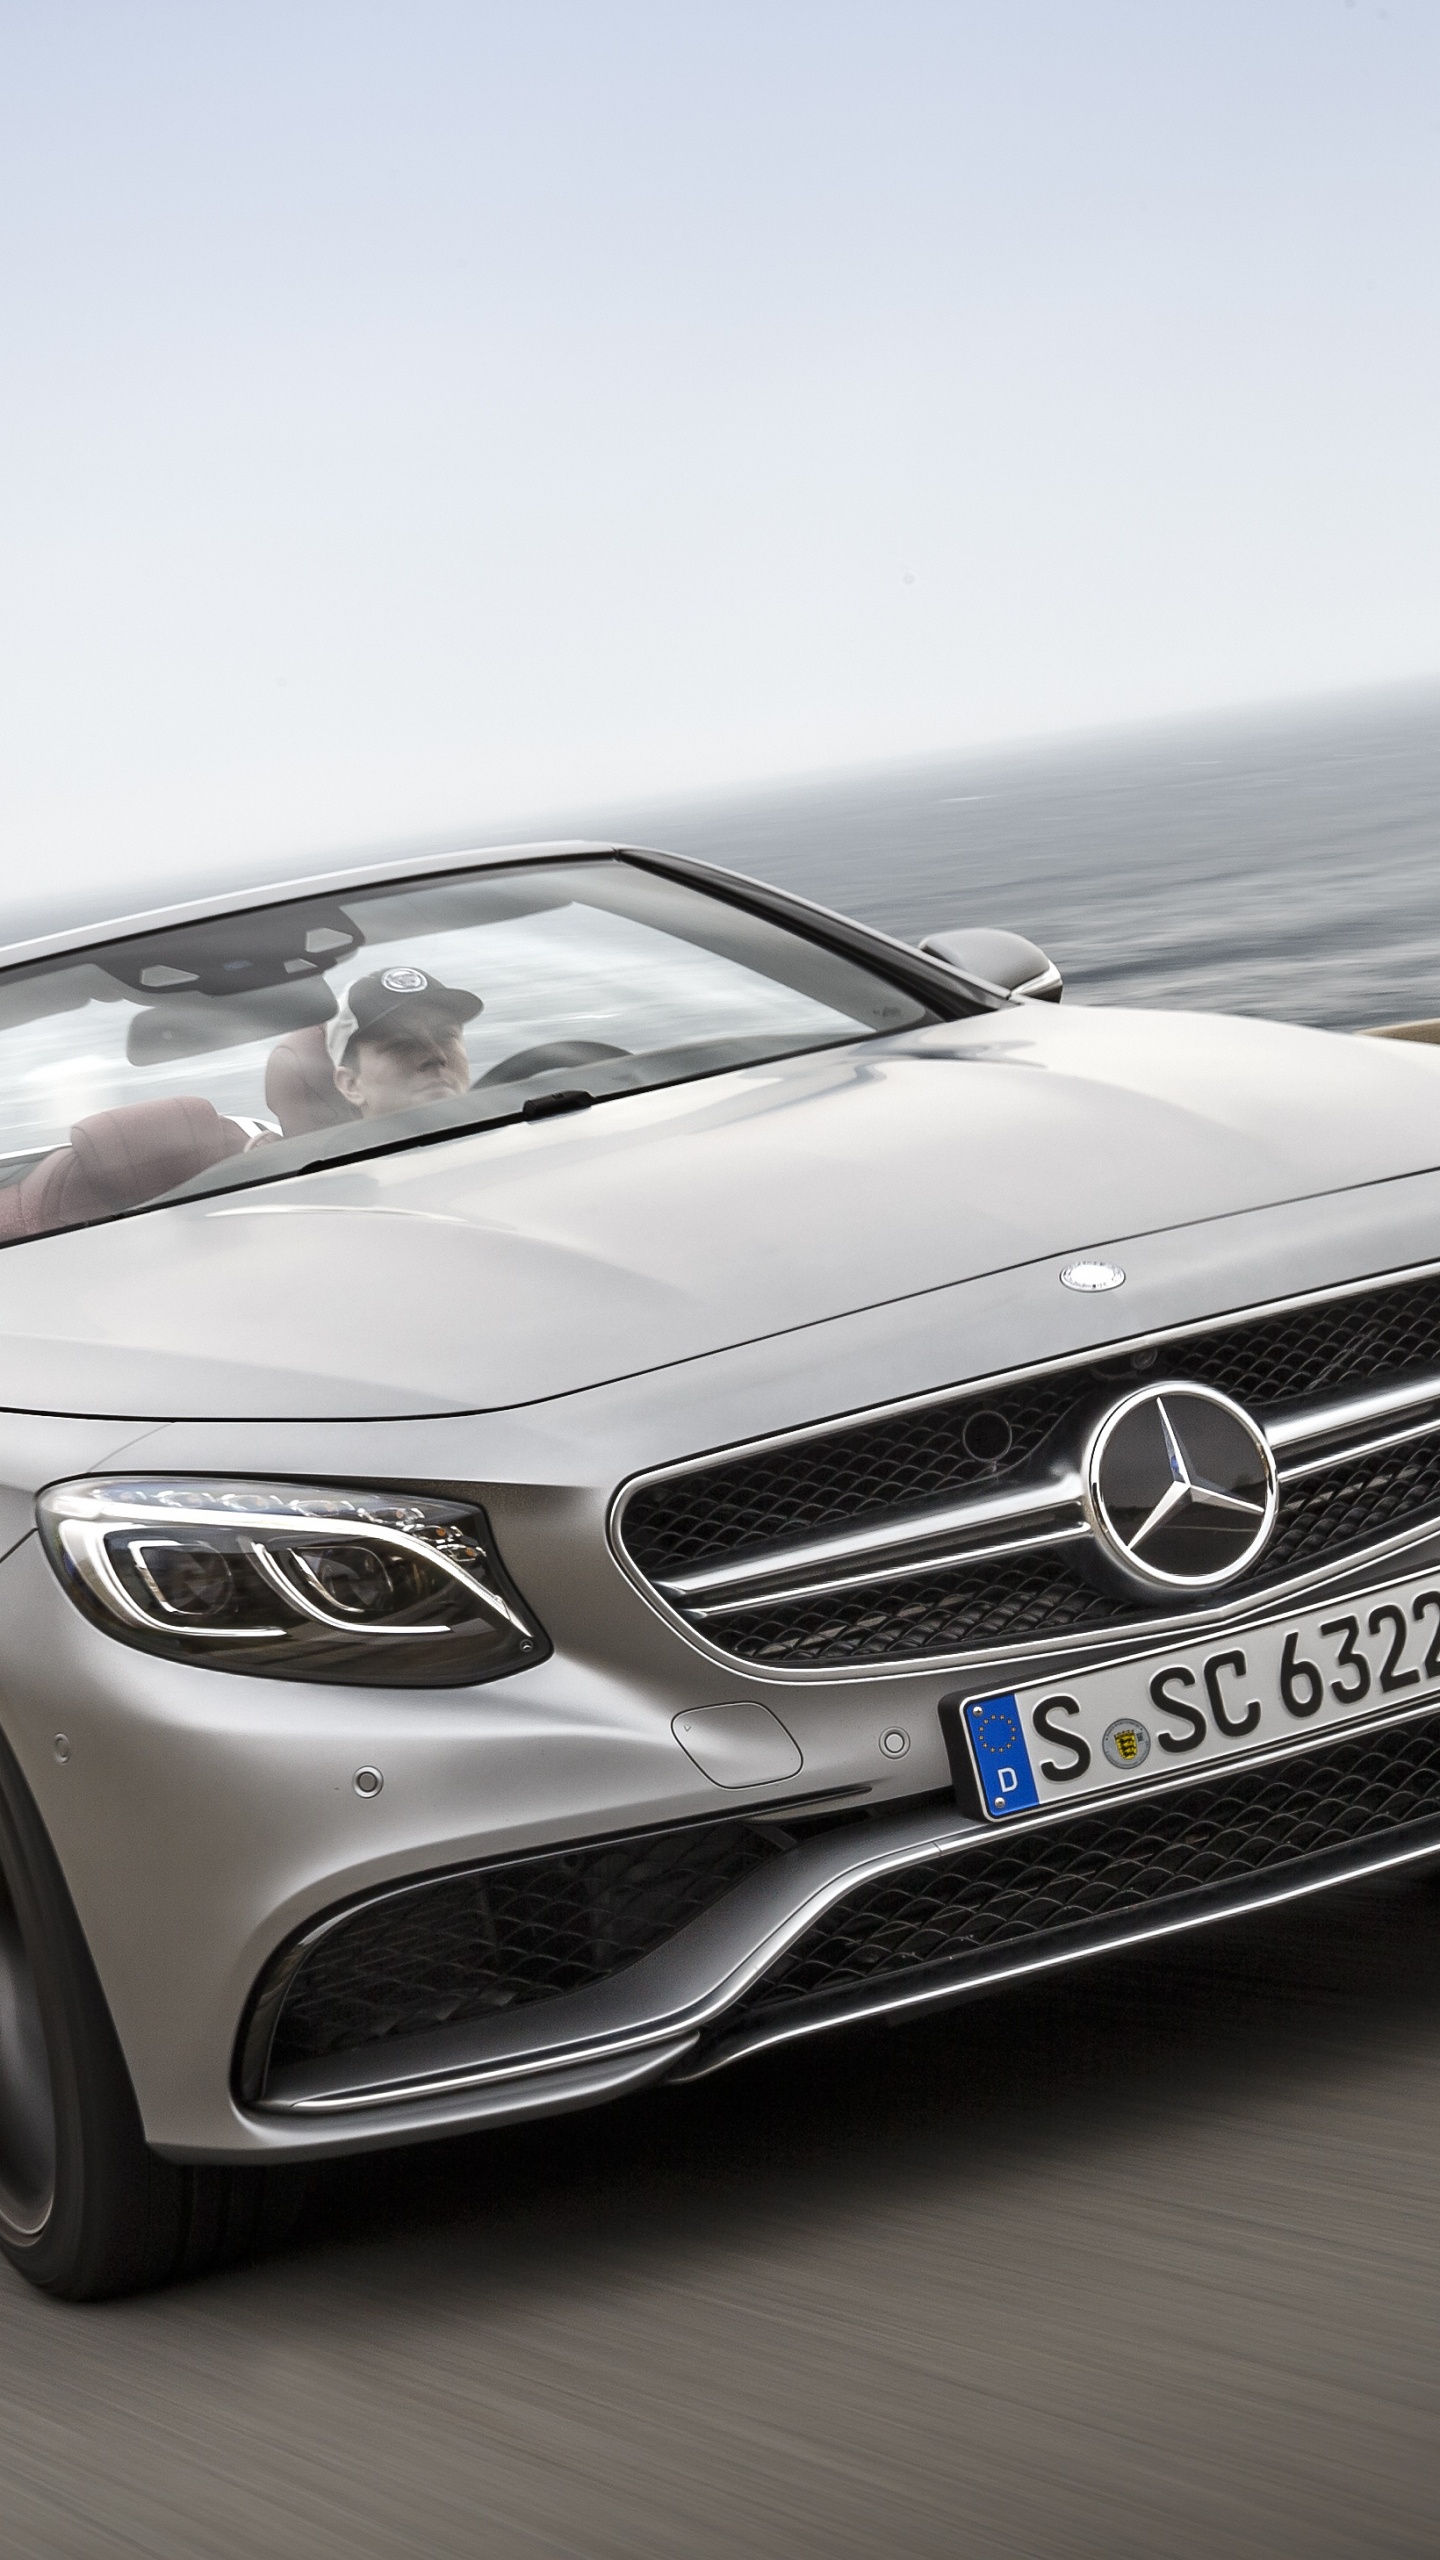 Gray Mercedes Benz Convertible Coupe on Road During Daytime. Wallpaper in 1440x2560 Resolution